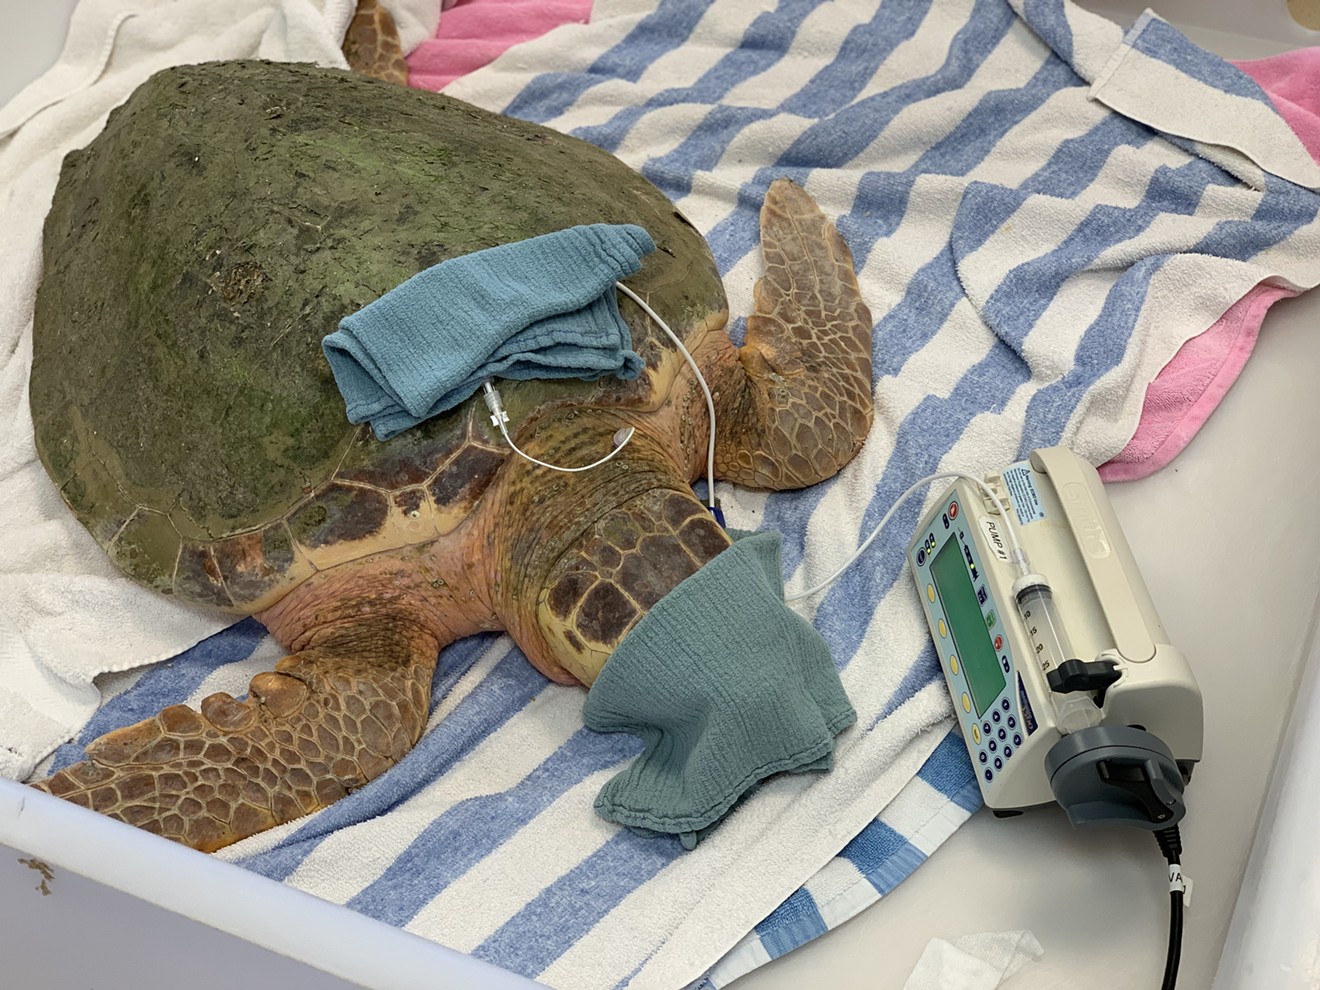 Sea turtles suffering from toxic red tide exposure could benefit from a therapy used to treat human drug overdoses.